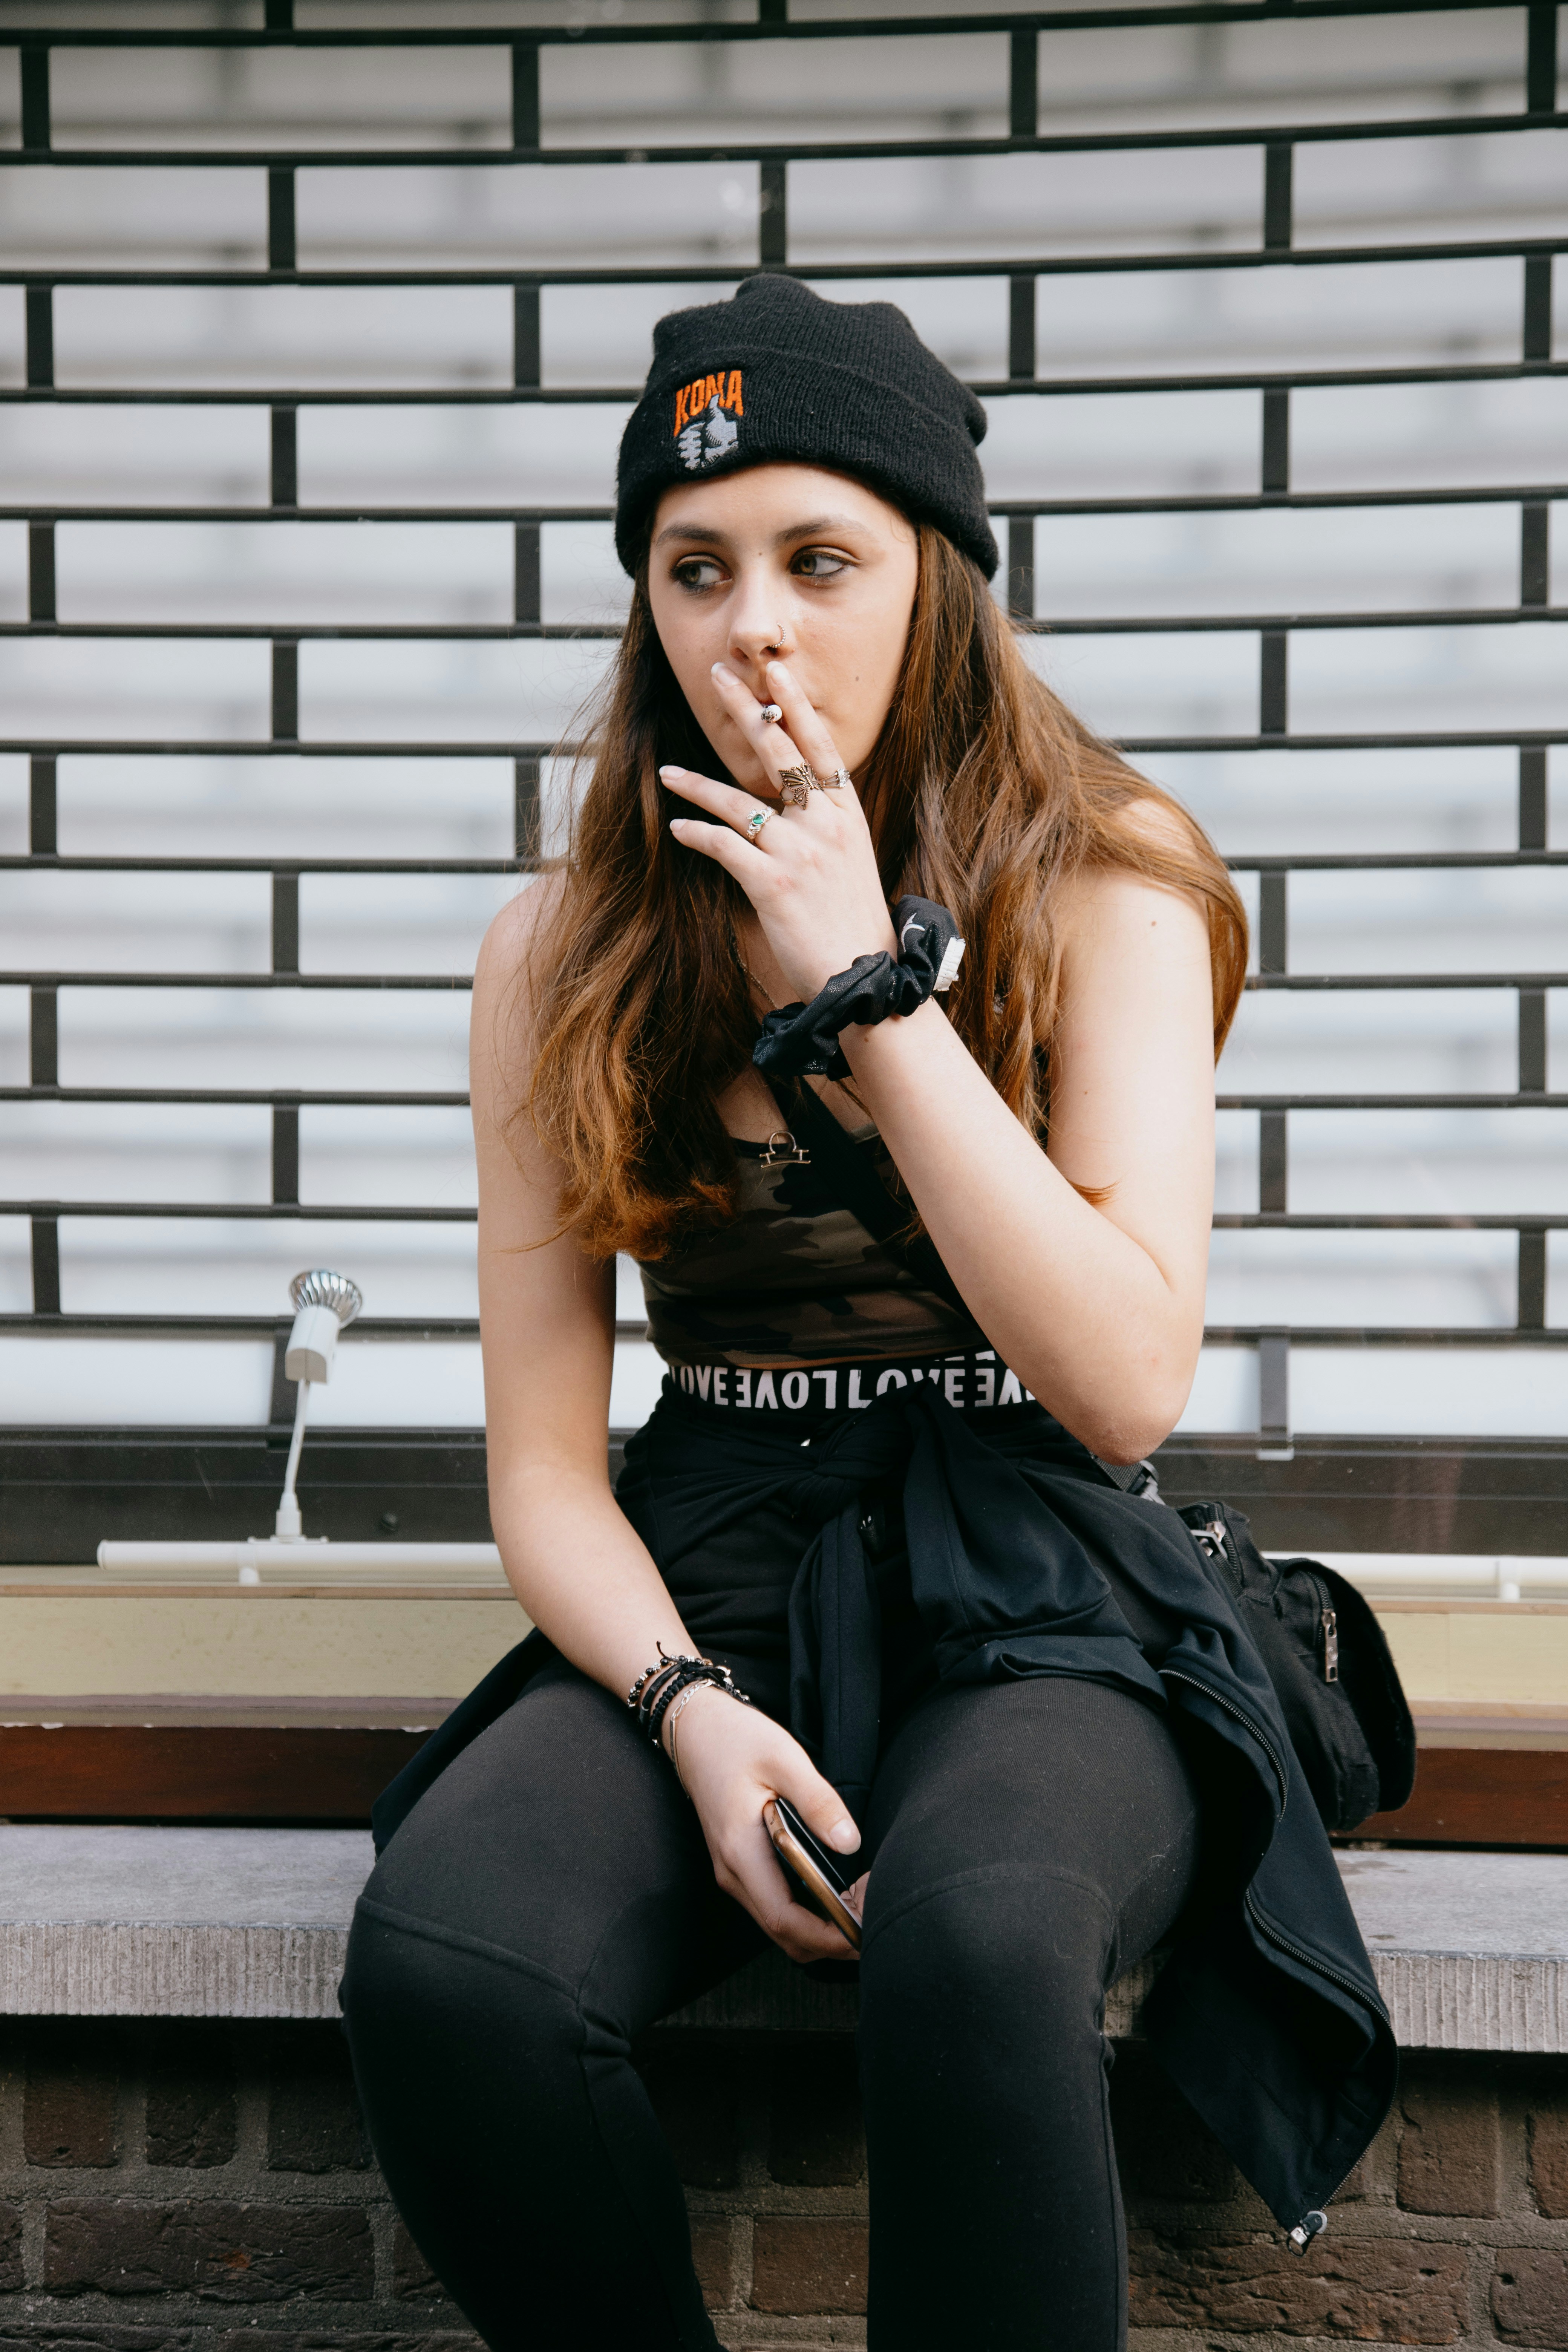 Just like I do so many times, she was sitting in front of a music shop, having a little cigarette break. I loved how different she looked in comparison to all the \